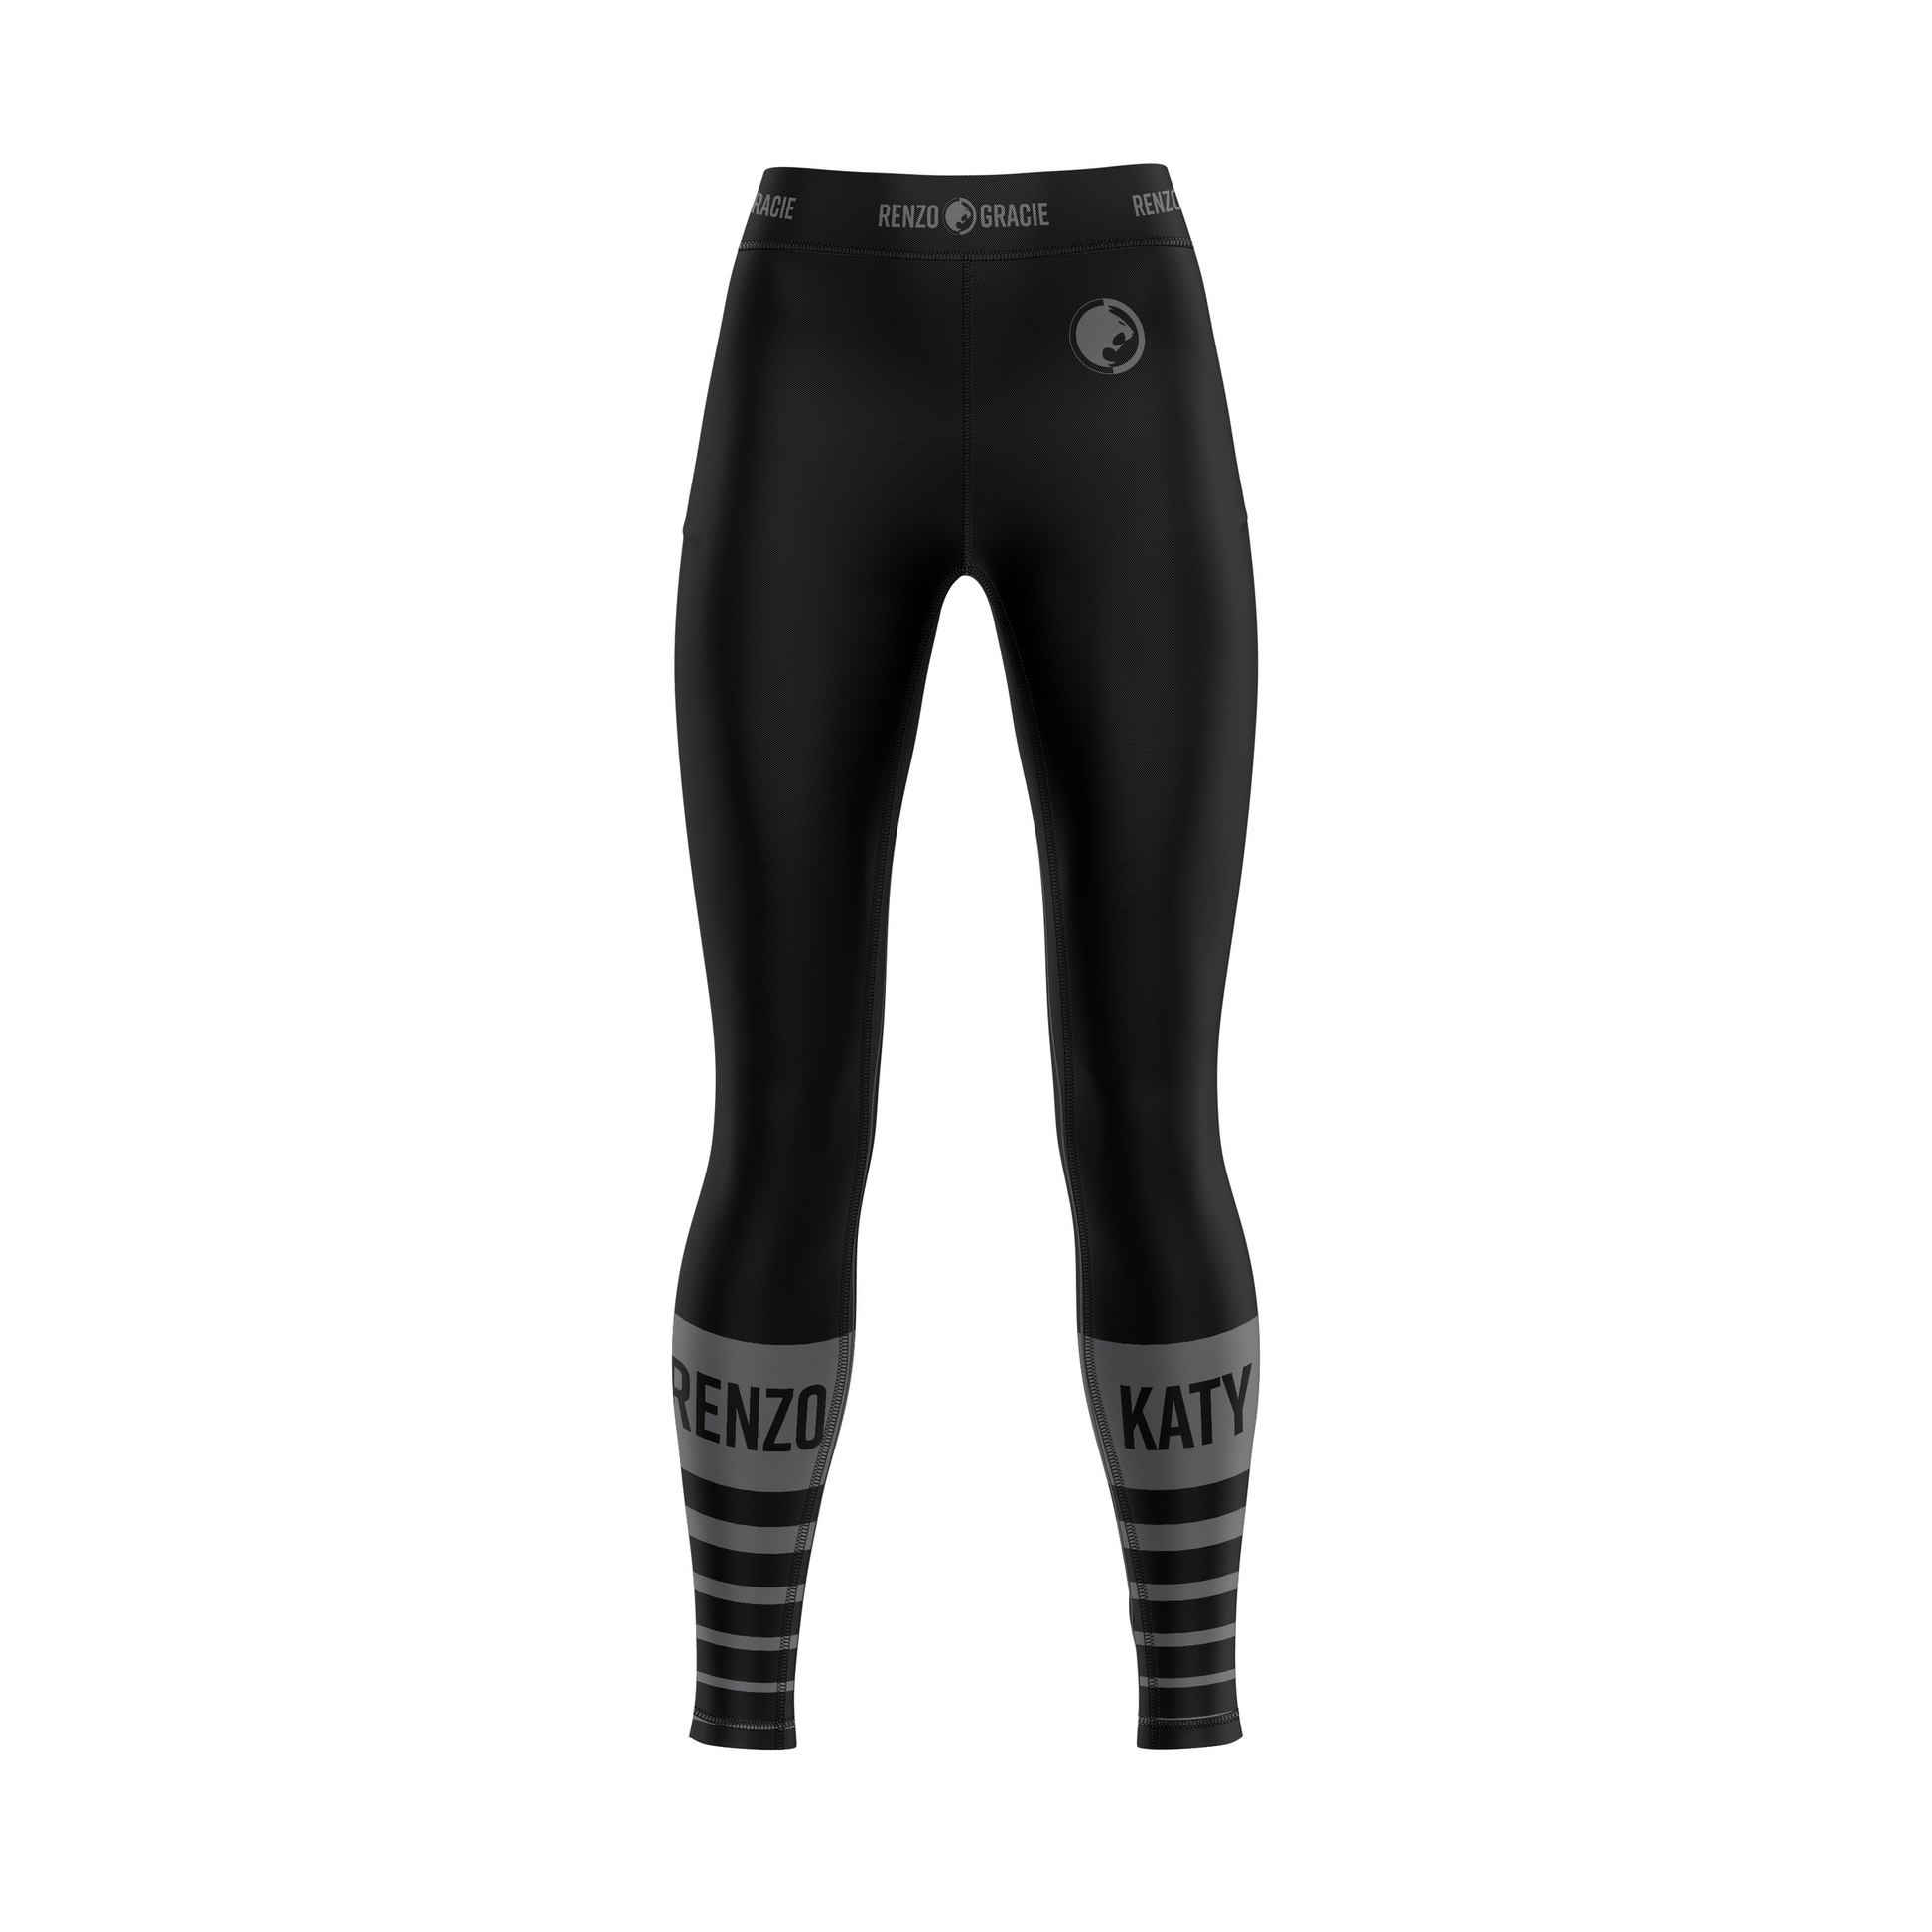 wholesale Renzo Gracie Katy women's grappling tights Standard Issue, black and grey